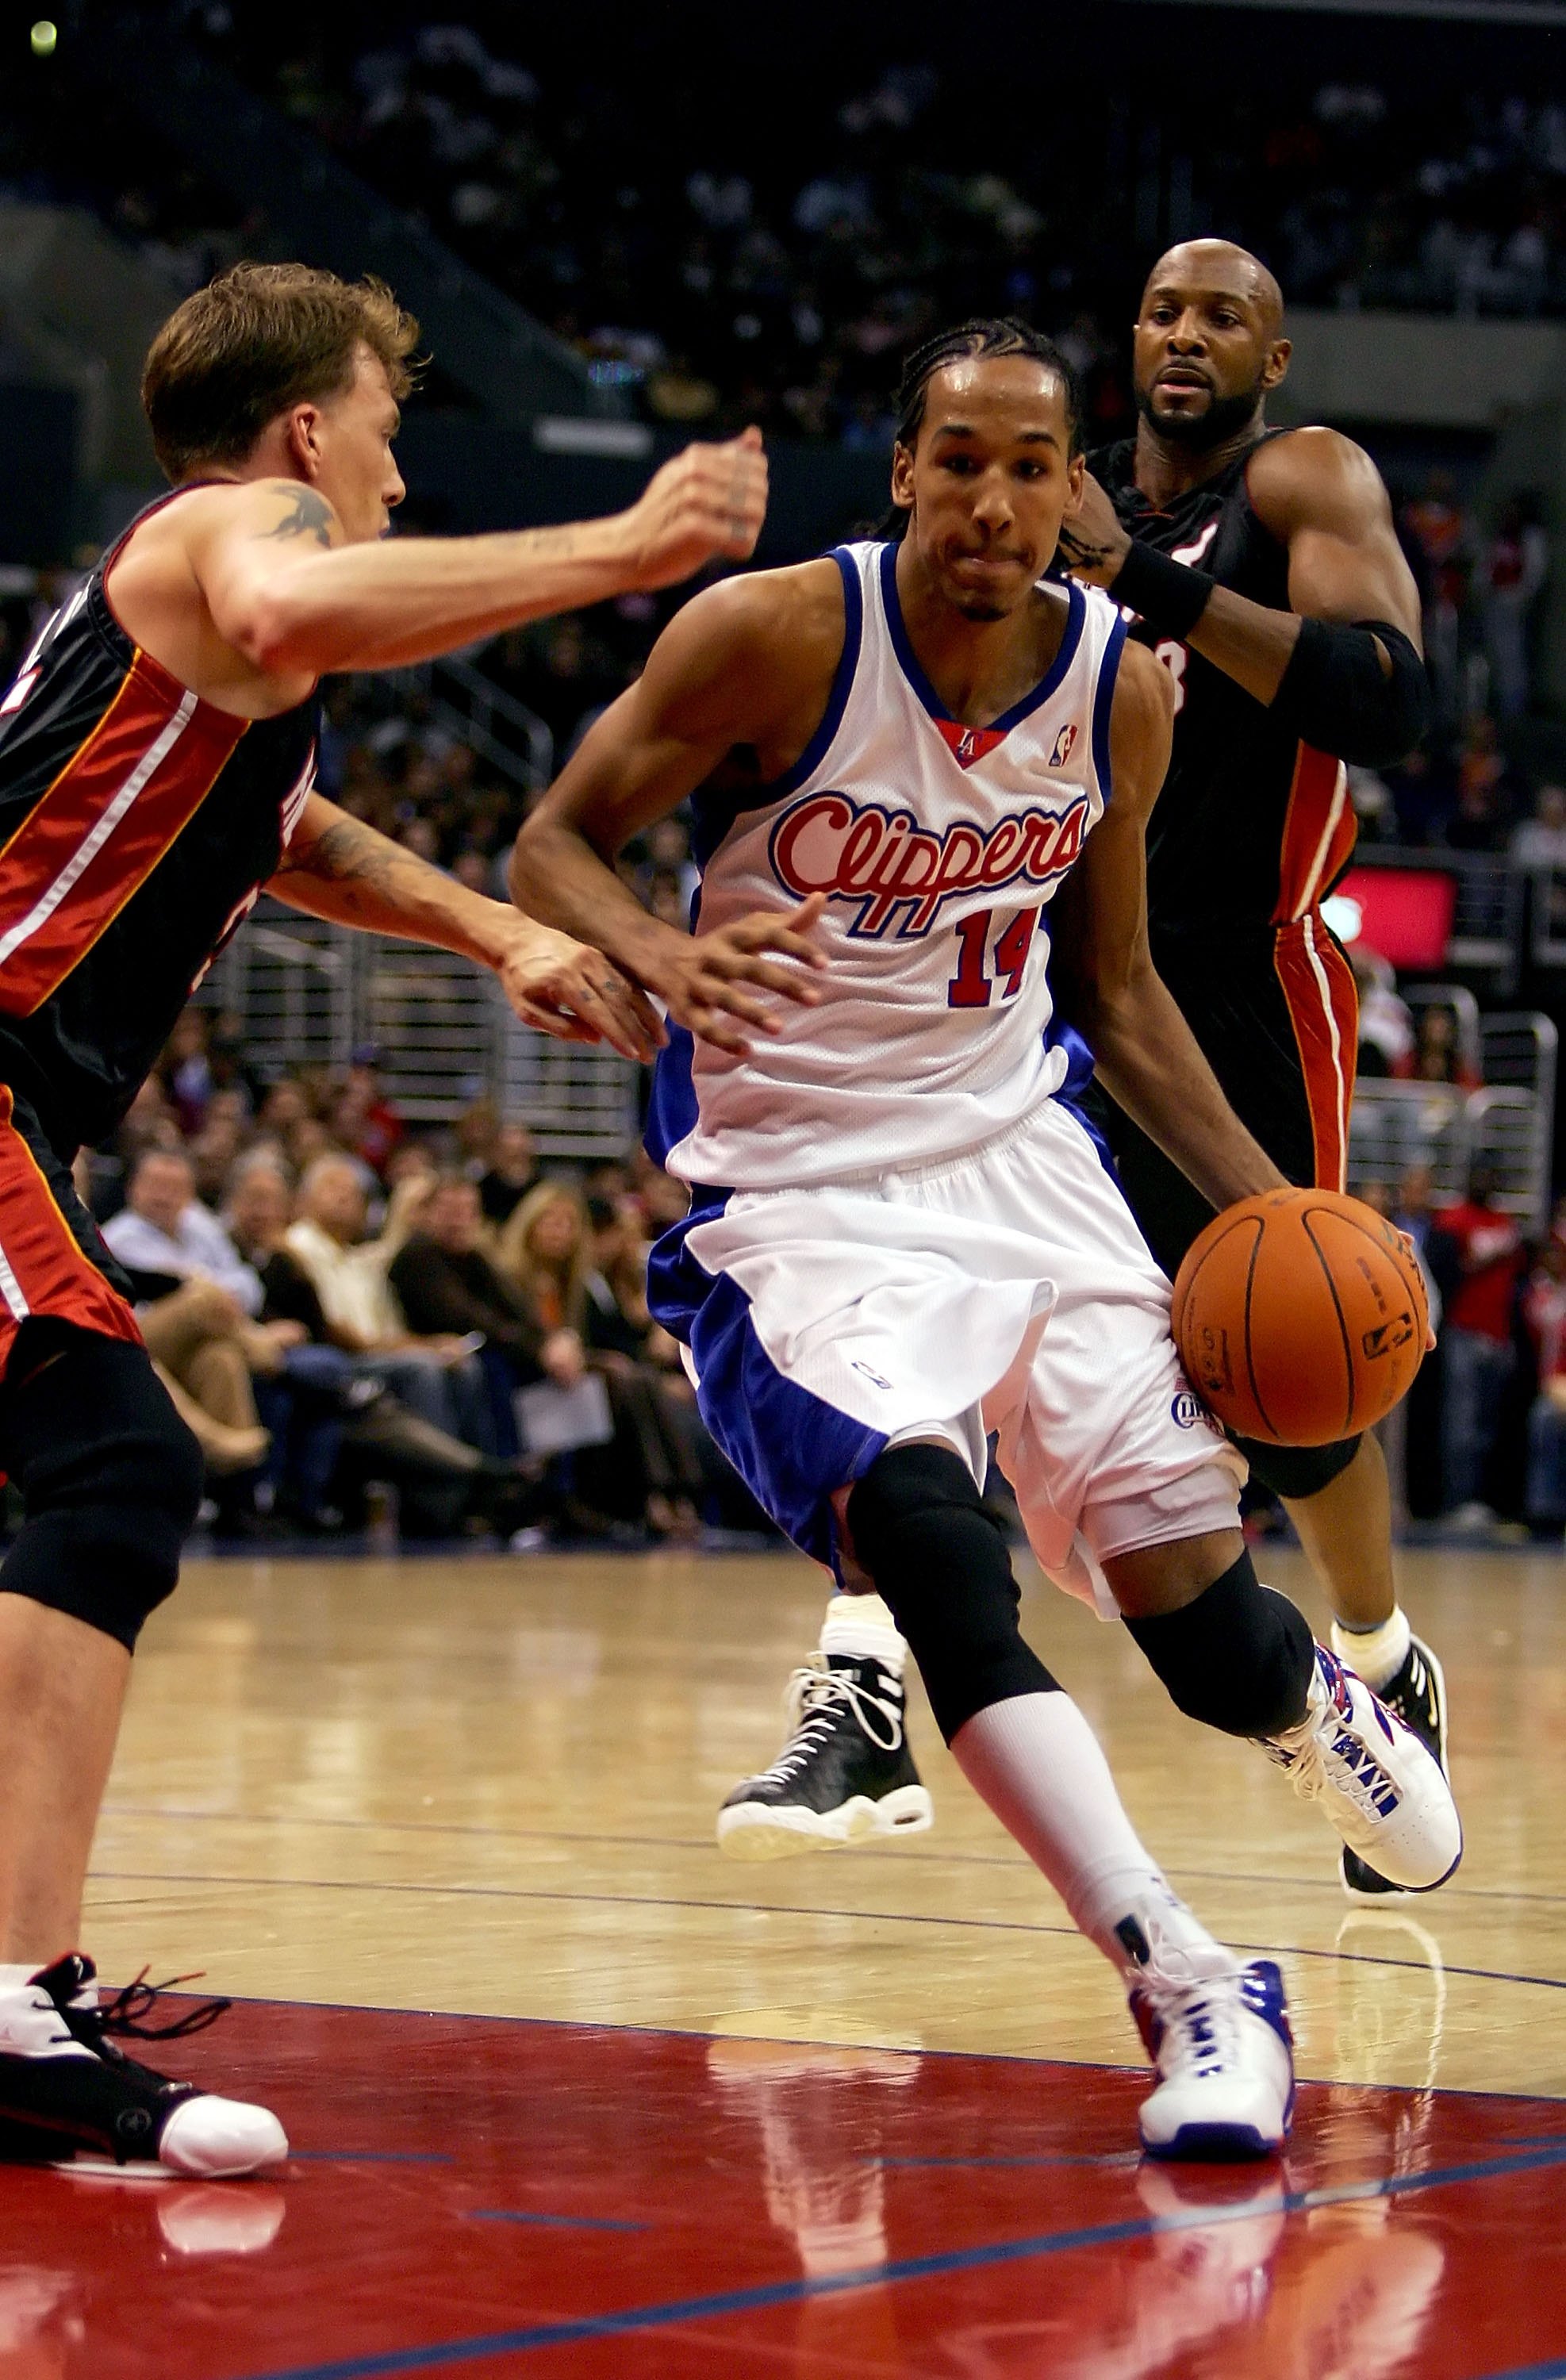 LOS ANGELES, CA - DECEMBER 05:  Shaun Livingston #14 of the Los Angeles Clippers drives through the key against Jason Williams #55 of the Miami Heat during the game on December 5, 2006 at Staples Center in Los Angeles, California.  NOTE TO USER: User expr